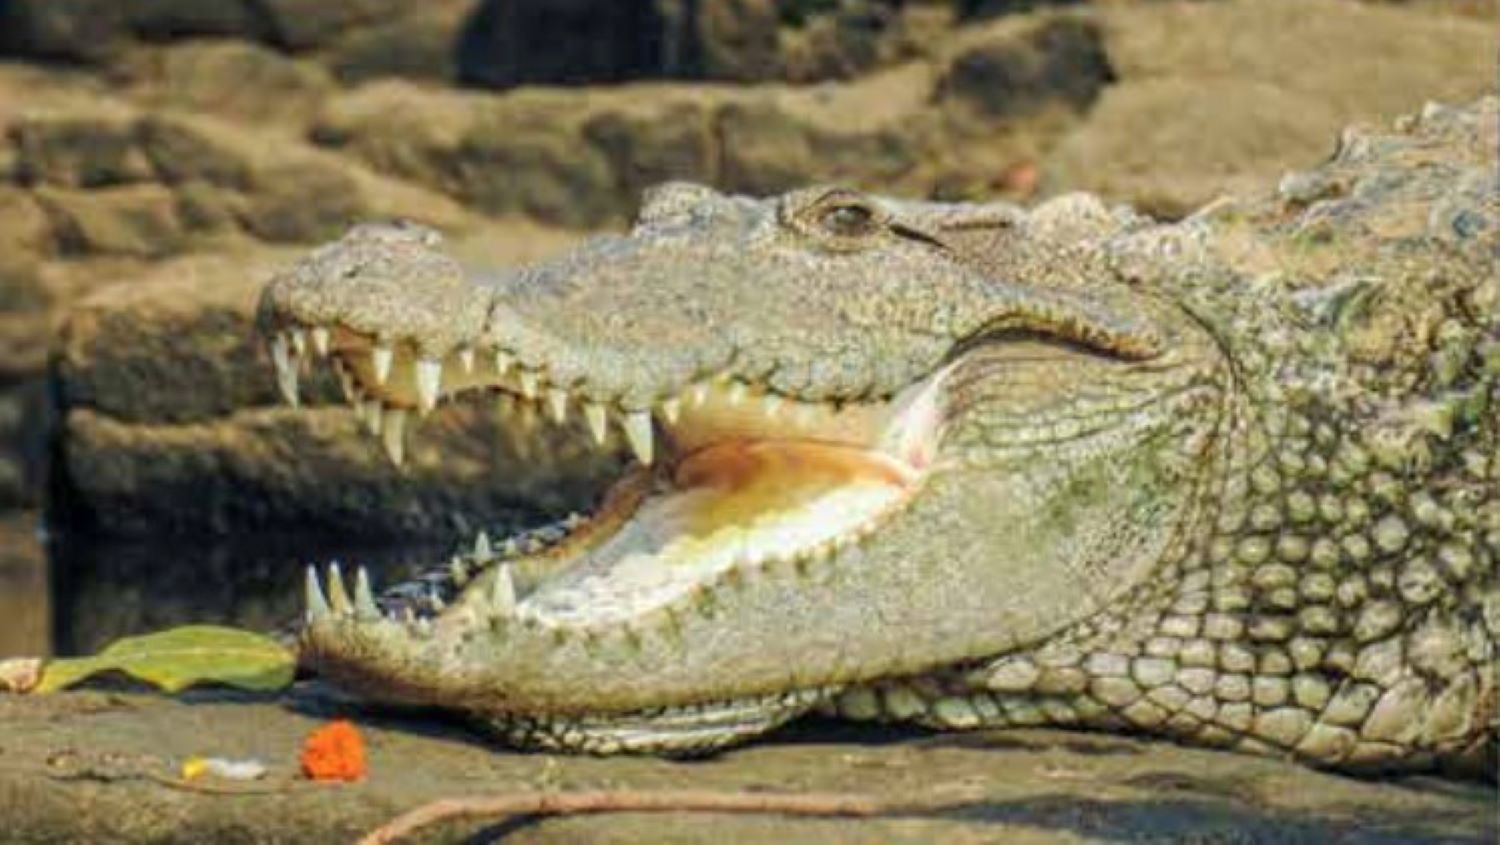 a crocodile with its jaws open next to a marigold